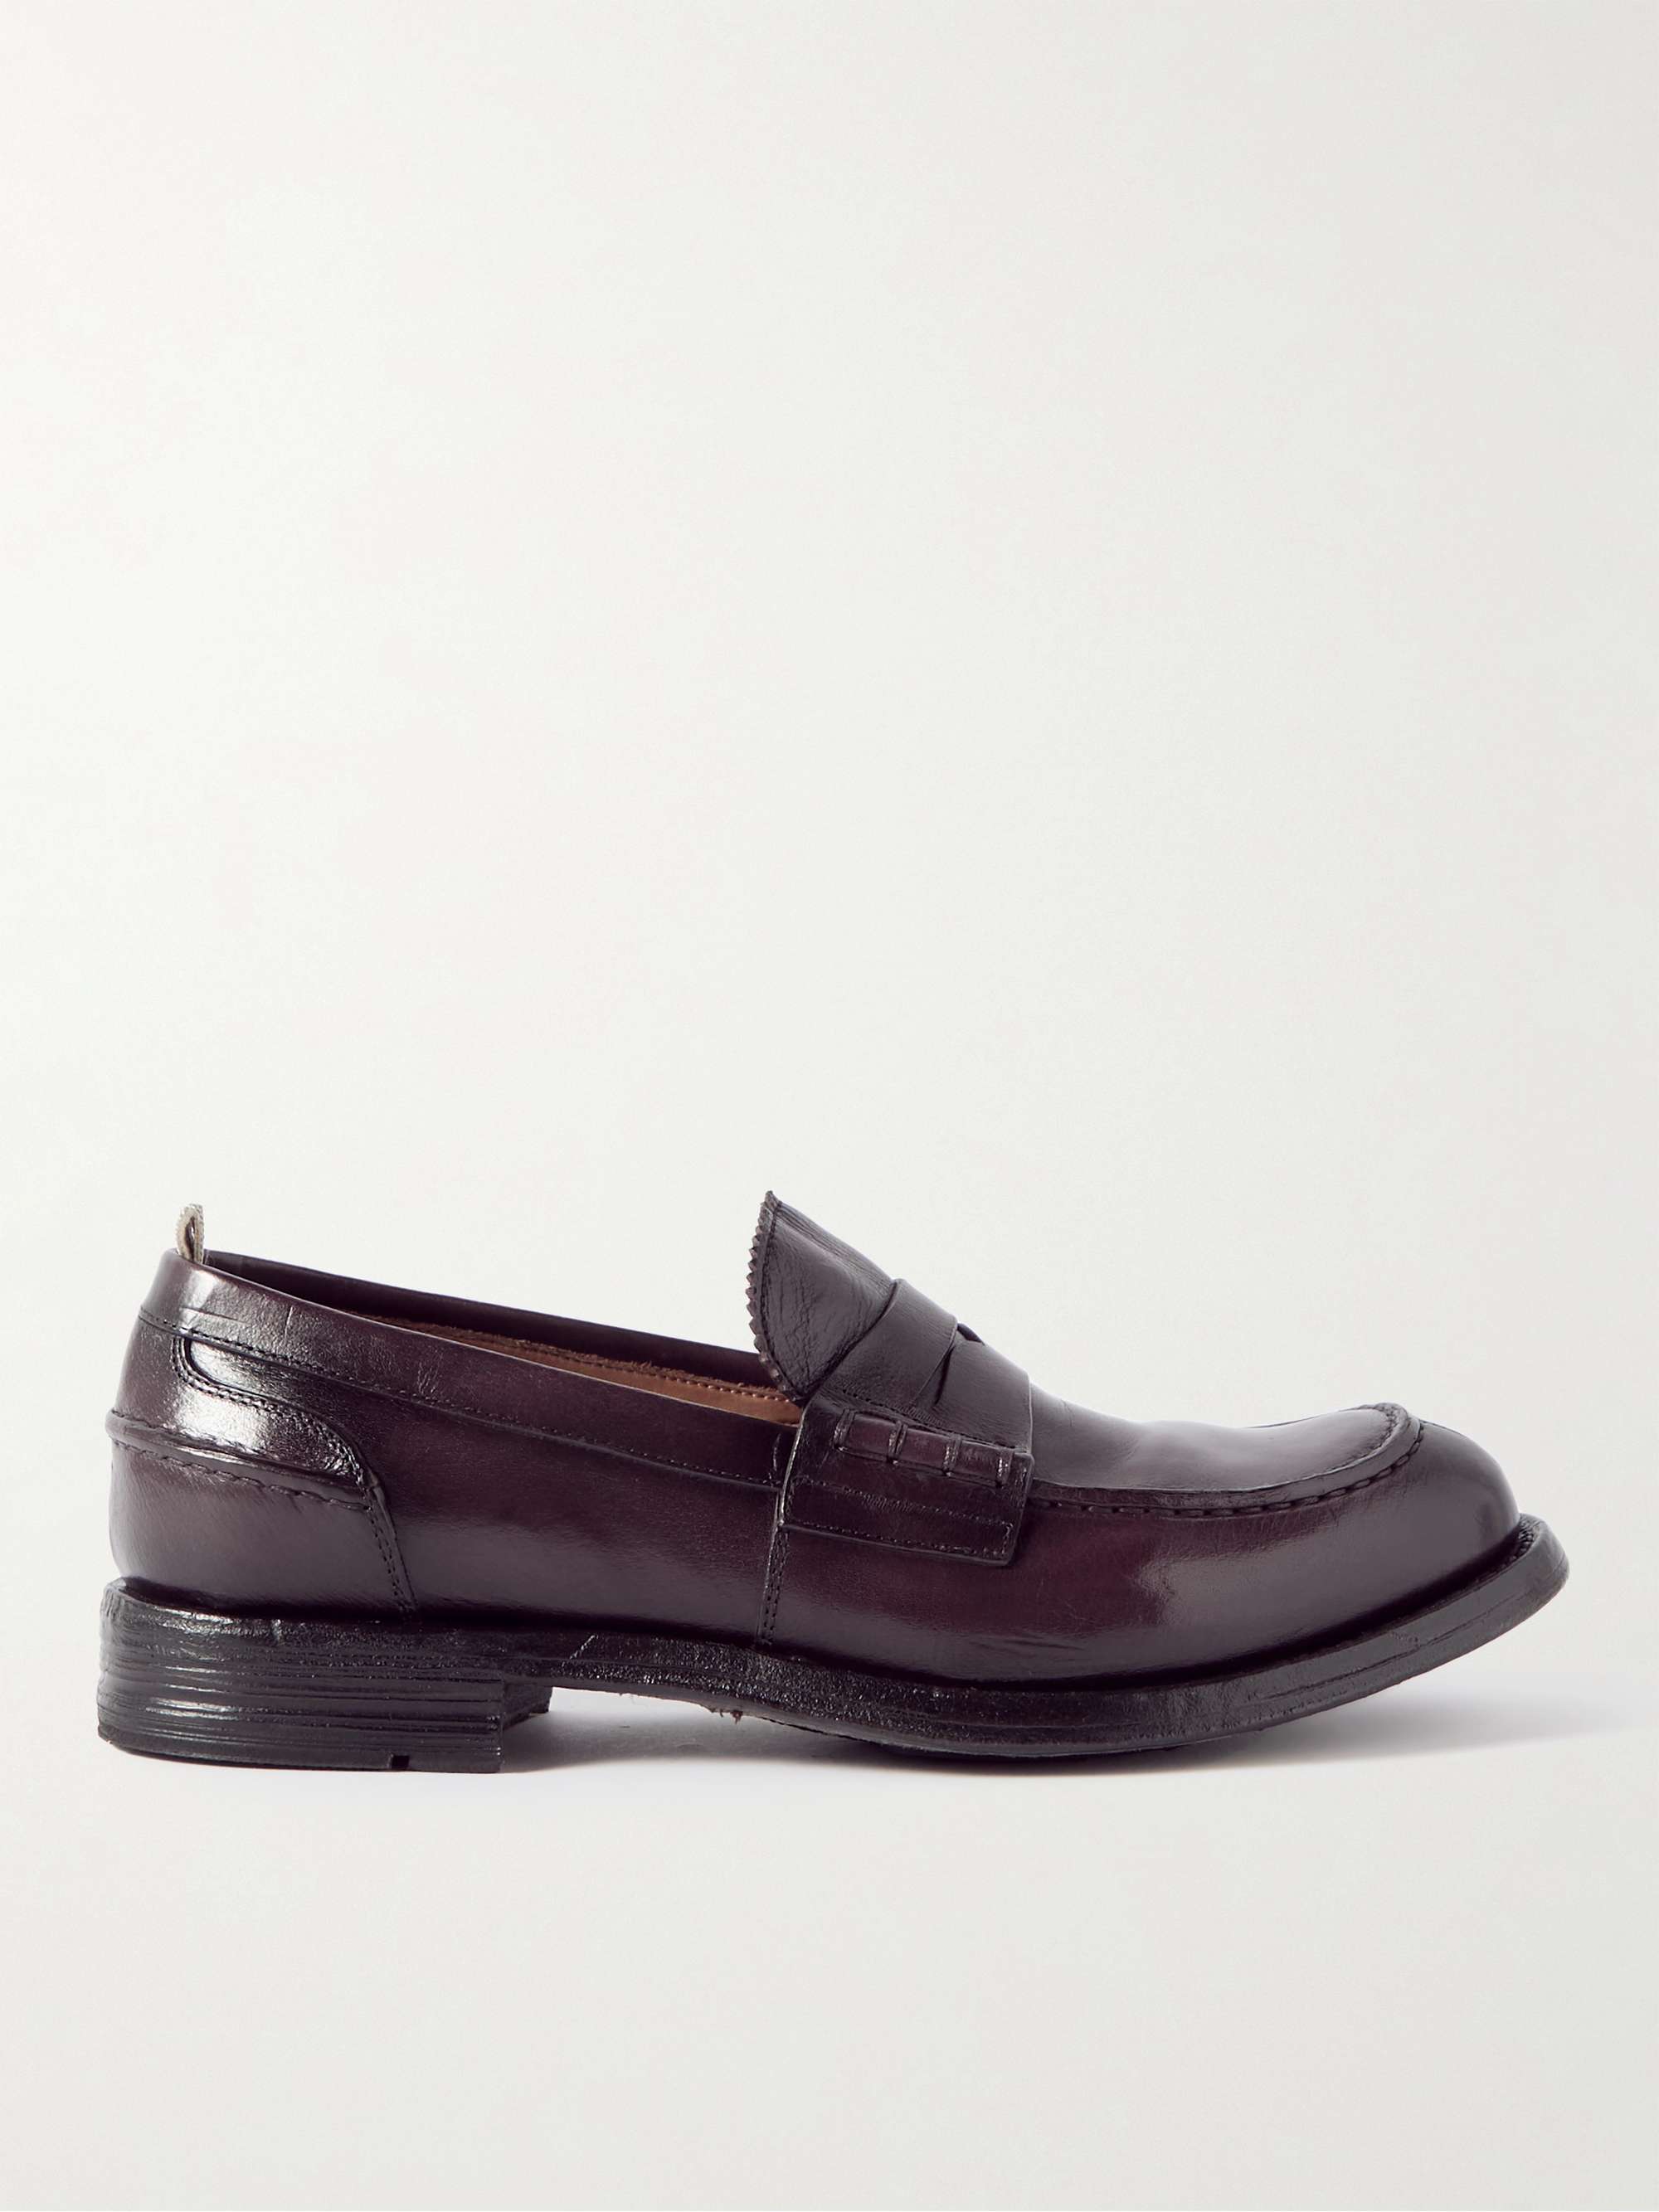 OFFICINE CREATIVE Balance Leather Penny Loafers